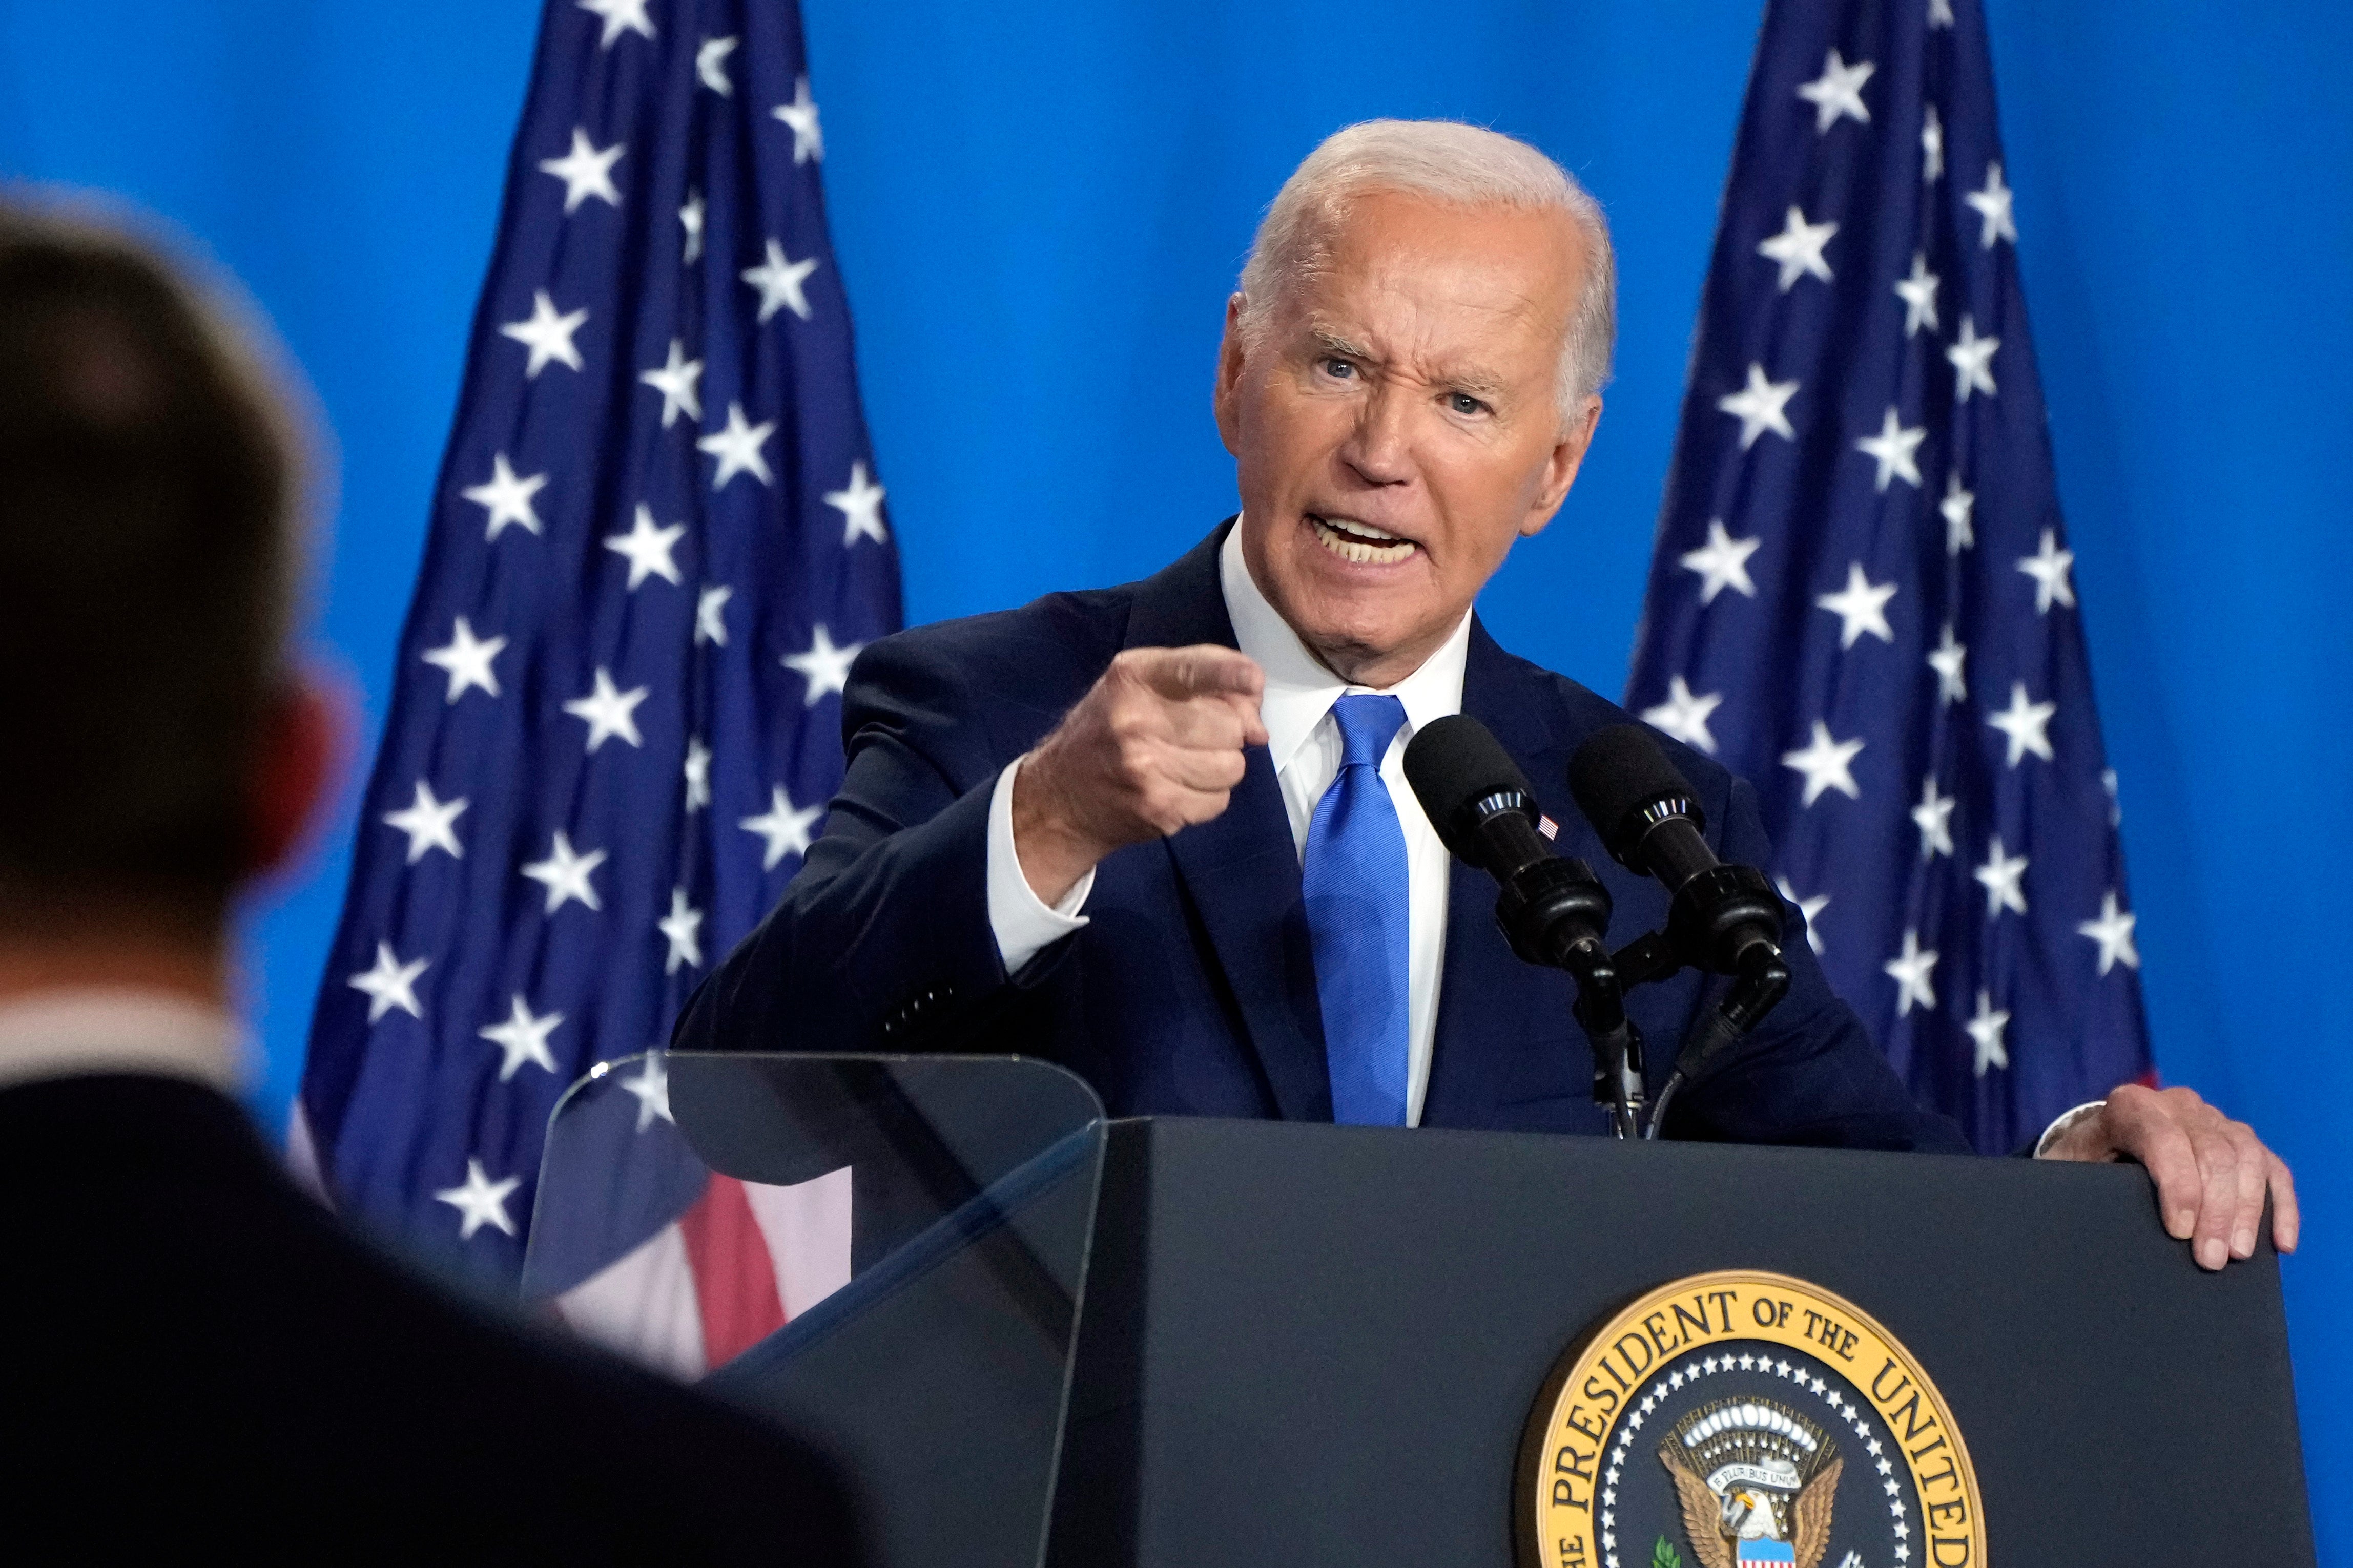 In his first press conference for eight months, Biden confused his running-mate, Kamala Harris, with his mortal enemy, Donald Trump